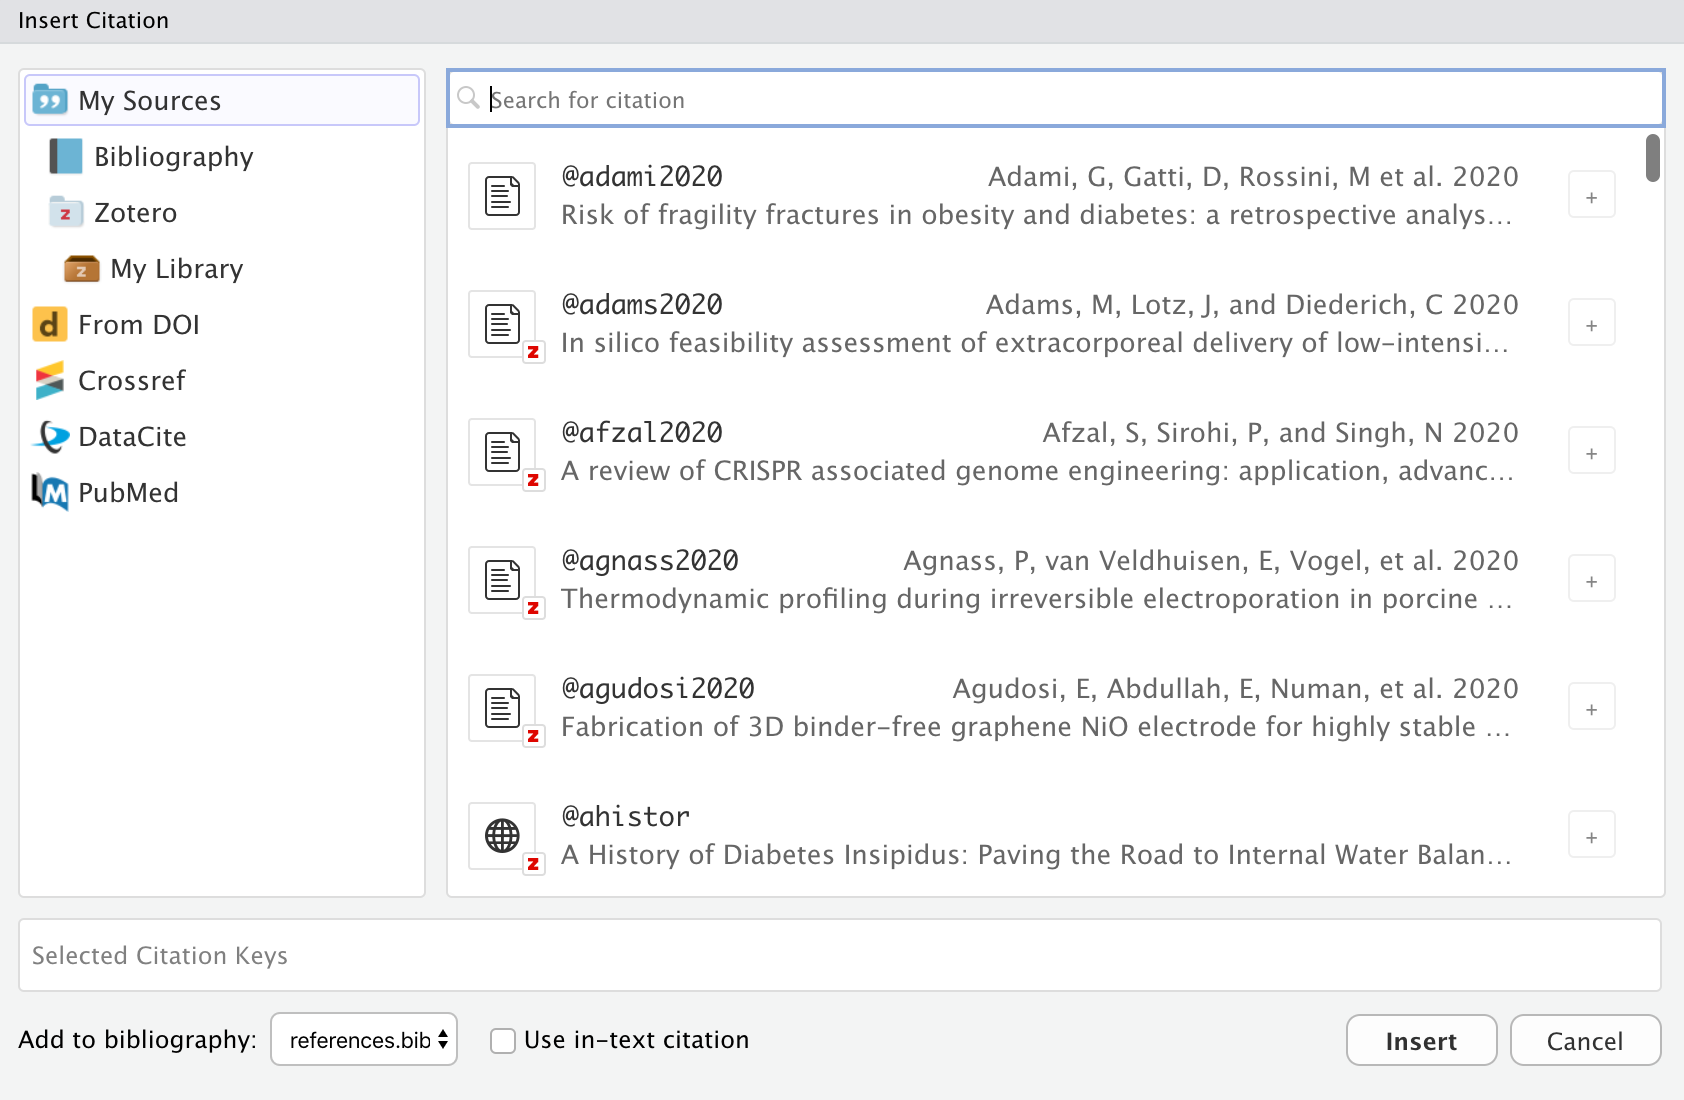 The 'Insert Citation' window in RStudio. There is a vertical section that takes approximately a quarter of the window along the left side. Arranged vertically in this section are options for 'My Sources', 'Bibliography', 'Zotero', 'My Library', 'From DOI', 'Crossref', 'DataCite', and 'PubMed'. Along the top of the section on the right is a search bar. There is a black cursor over the words 'Search for citation' in light gray text. Underneath this search bar is a search results pane. Each of the search results has a title of the form '@citation-ref', an icon to the left, the title of the paper in light gray text underneath running along the length of the search result, and the citation in light gray text to the right. Running along the bottom of the window across both the left and right sections is a box with light gray text that says 'Select Citation Keys'. Underneath this and in the bottom left corner of the window is the text 'Add to bibliography' followed by a drop-down menu that currently has the value 'references.bib.' To the right of that is a button for the 'Use in-text citation' button. Finally, there are 'Insert' and 'Cancel' buttons arranged side-by-side.